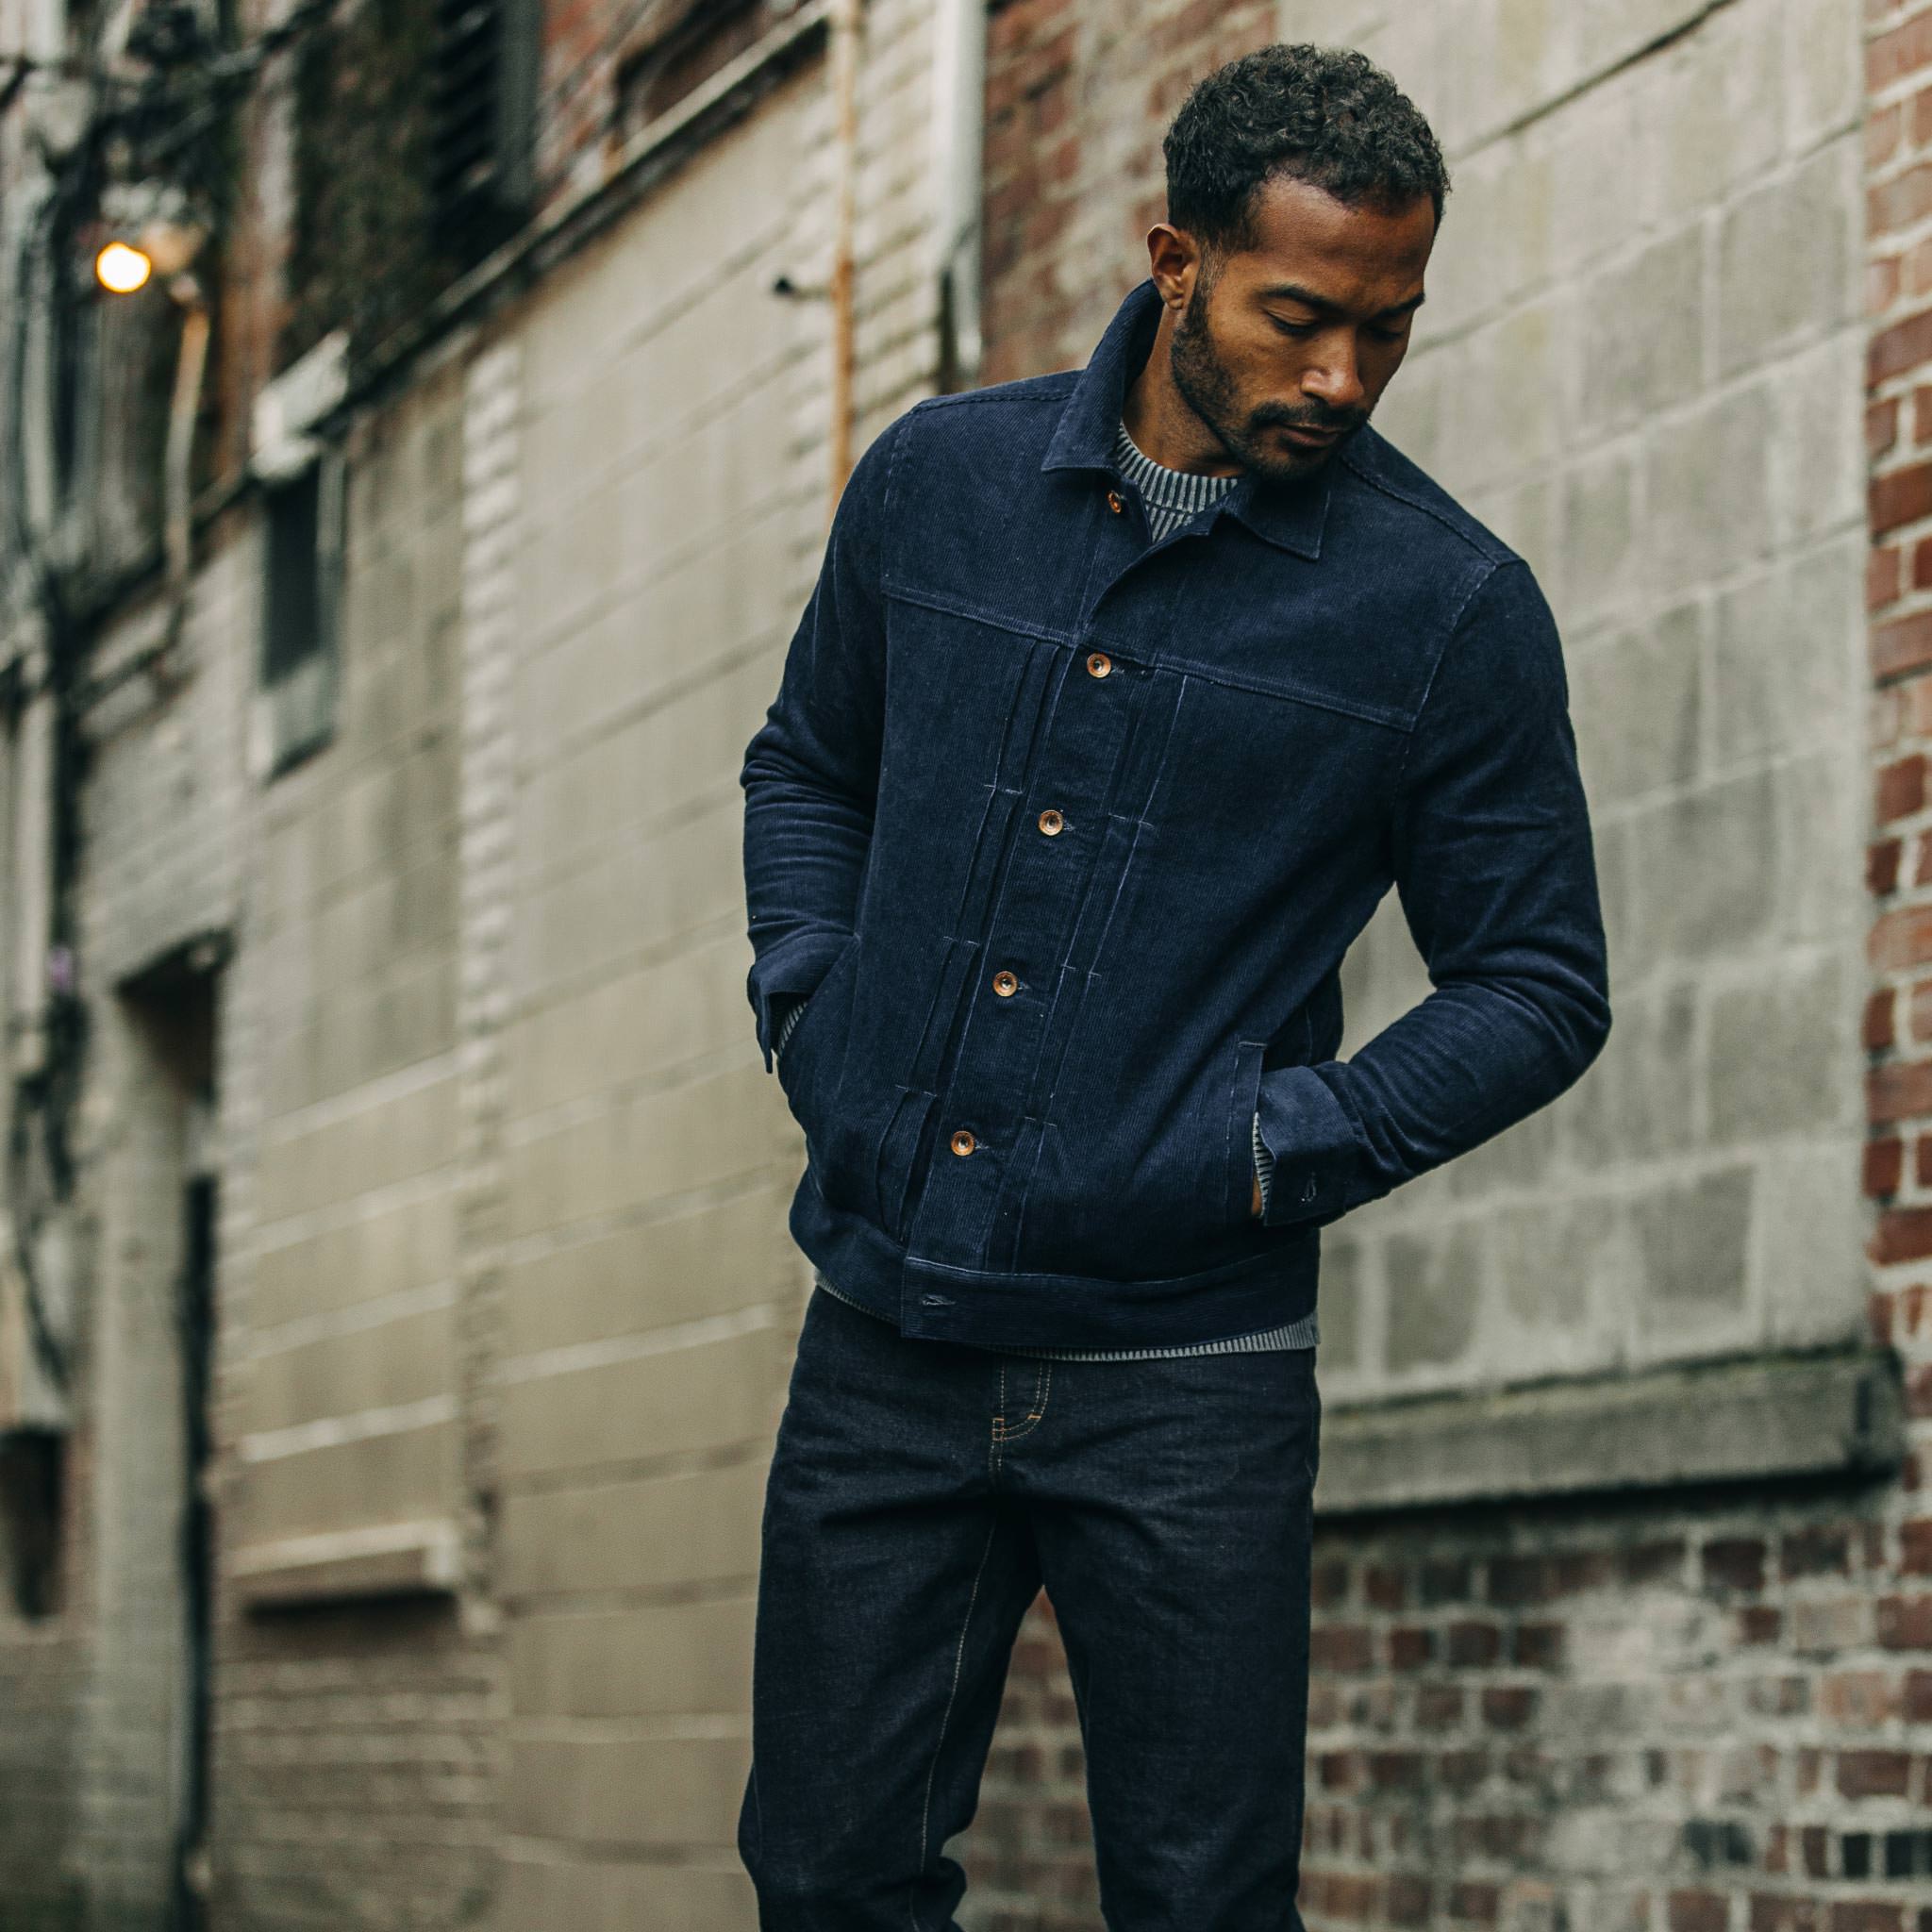 The Dispatch Jacket in Indigo Cord - Classic Men’s Clothing